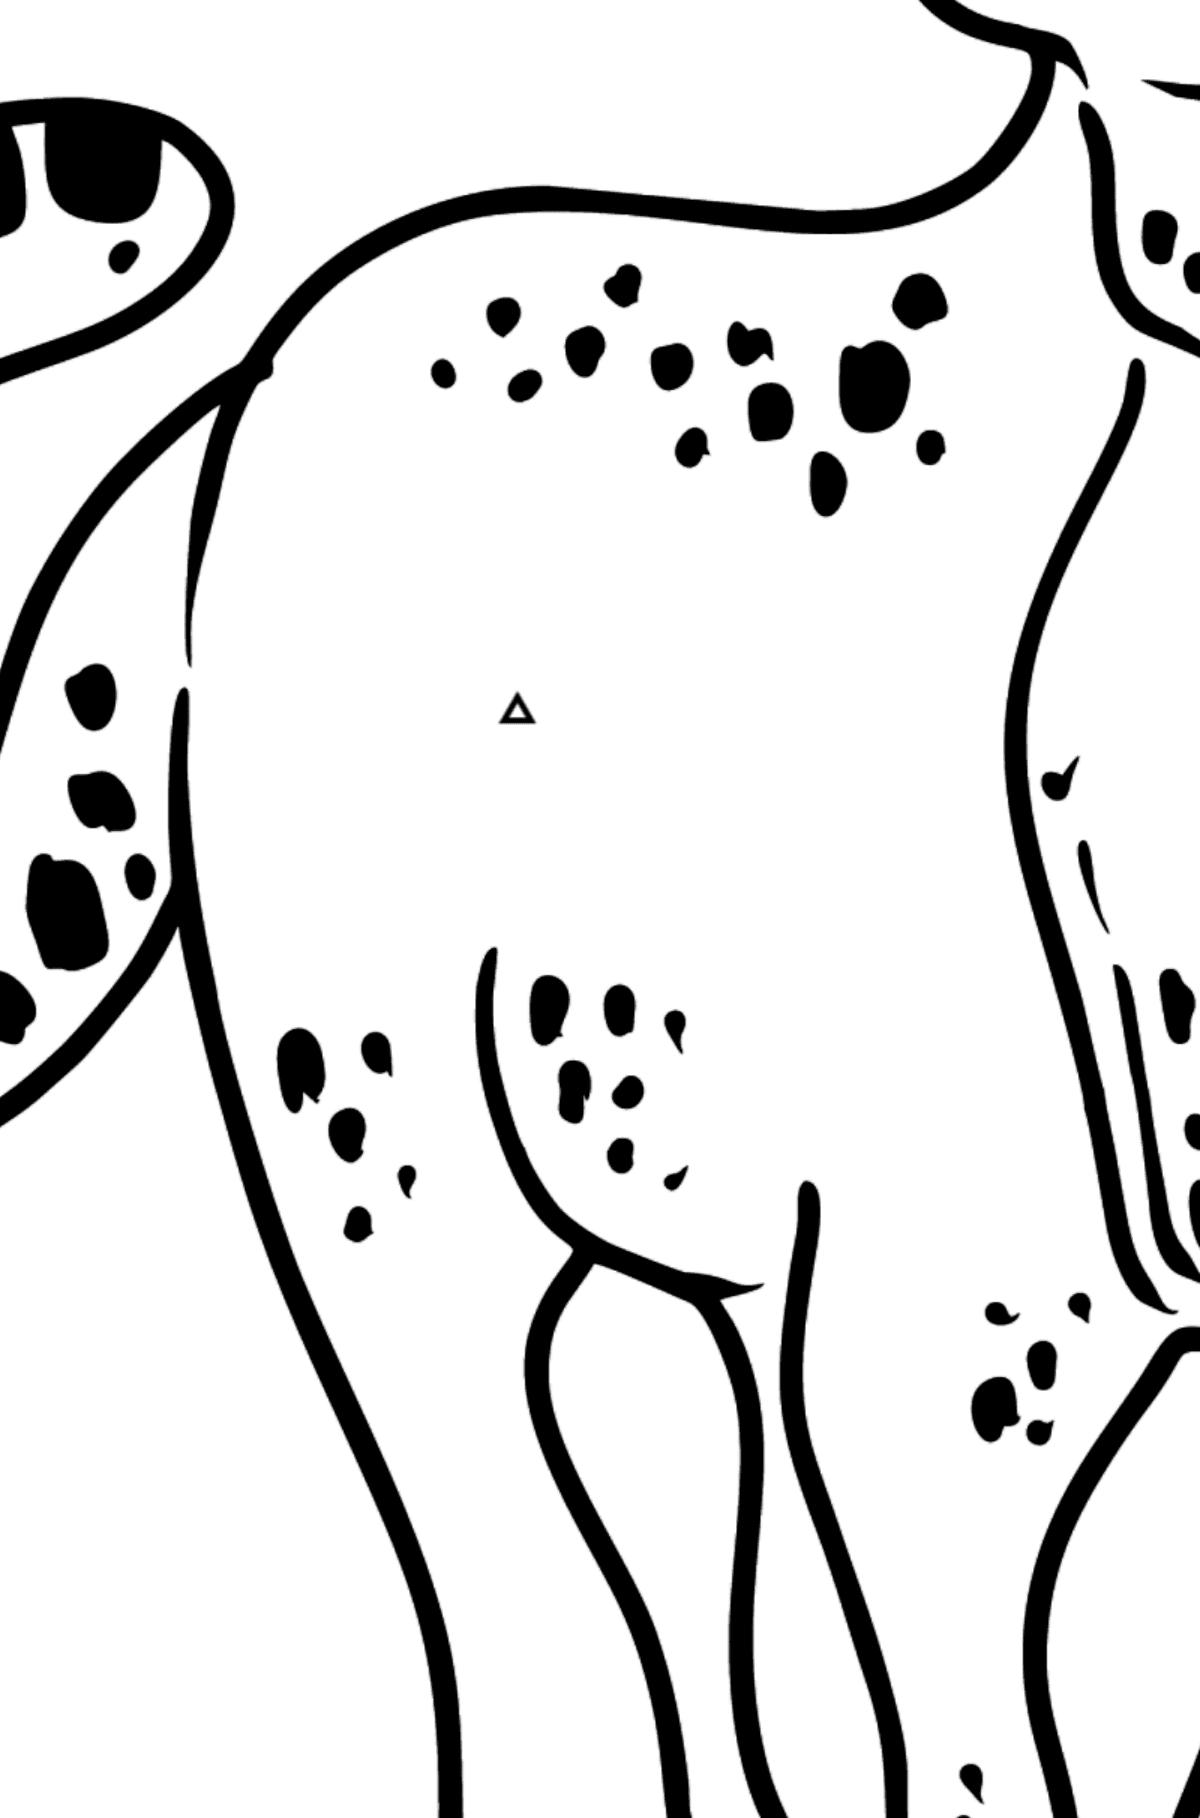 Leopard coloring page - Coloring by Geometric Shapes for Kids